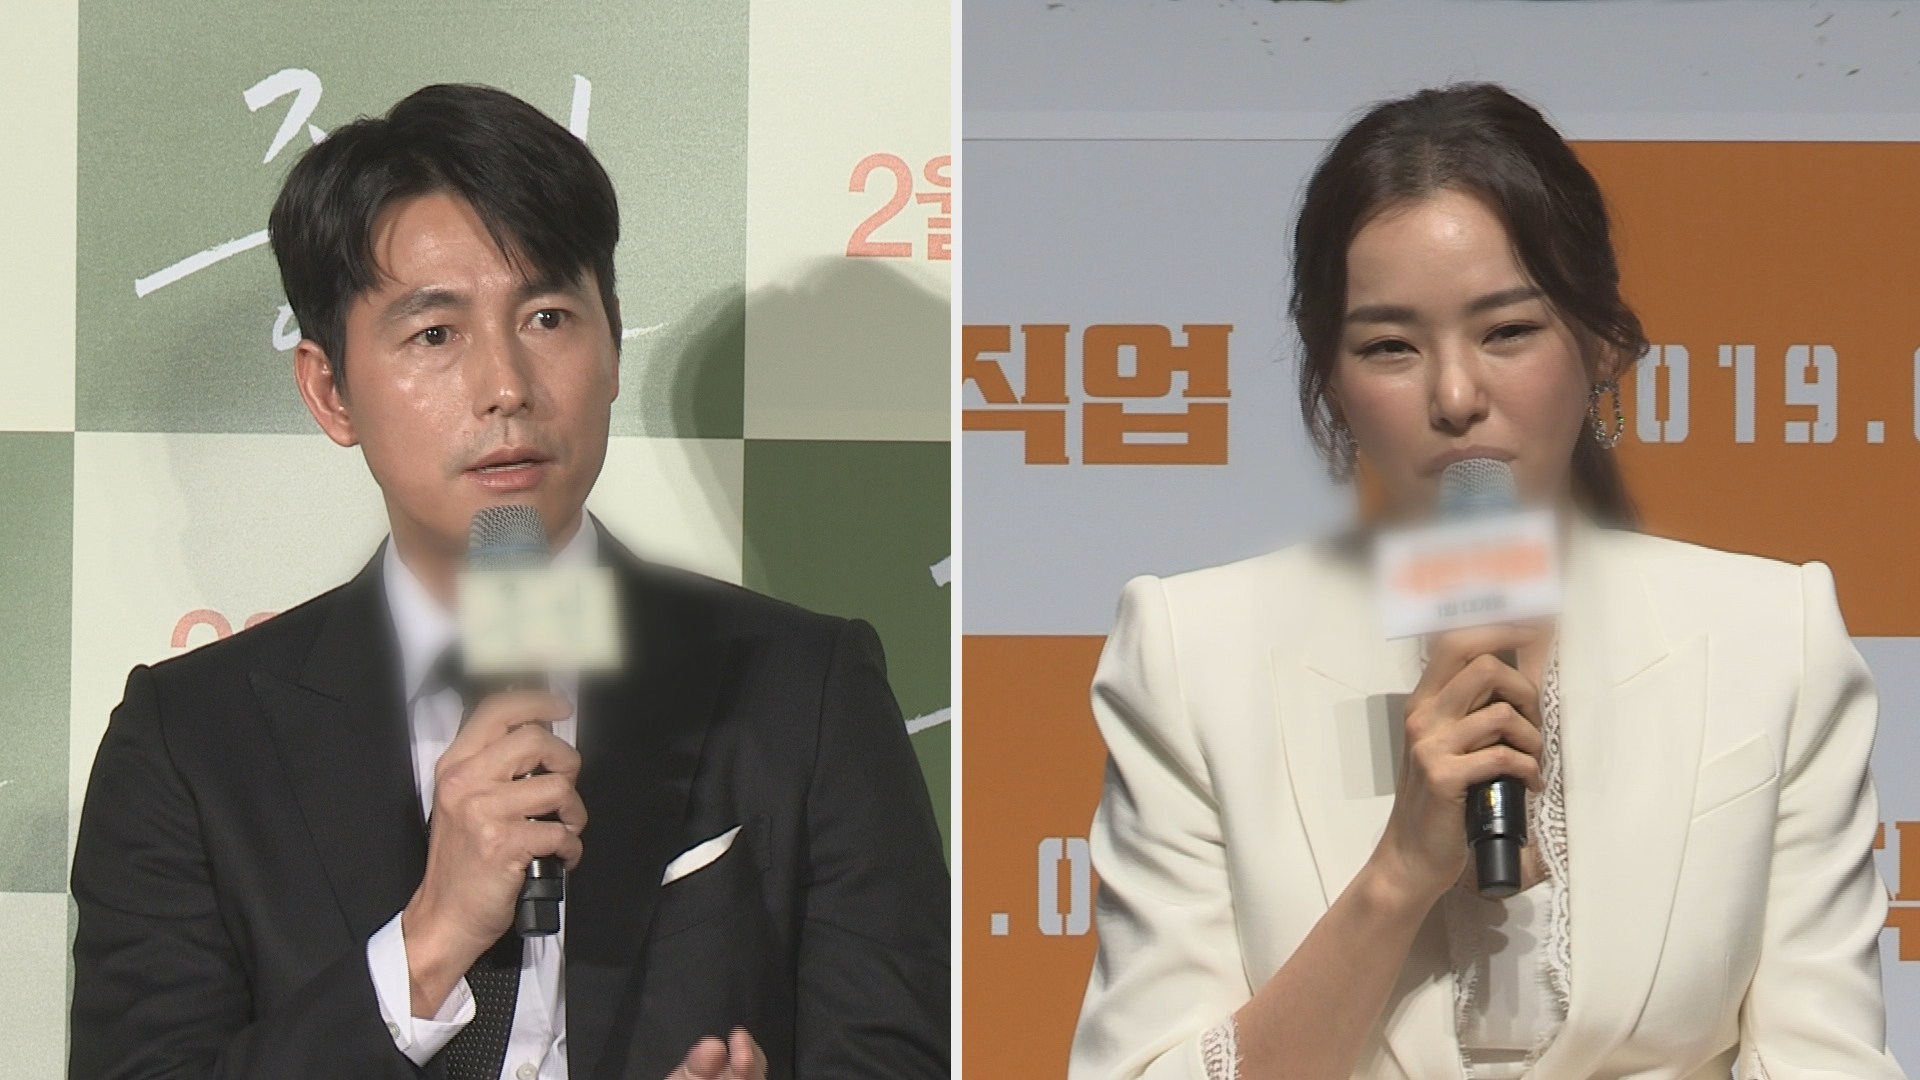 Actor Jung Woo-sung and Lee Ha-nui were selected as the hosts of the 24th Busan International Film Festival opening ceremony.According to the board of directors of the Busan International Film Festival, the two will host the opening ceremony at the Busan Cinema Center outdoor theater at 7 pm on the 3rd of next month.Currently, Jung Woo-sung is about to release the movie The Animals Who Want to Hold the Spray, and Lee Ha-nui is preparing to enter Hollywood.The Busan International Film Festival will be held from March 3 to 12 next month at the Busan Cinema Center in Haeundae-gu, Nampo-dong, Jung-gu, and Busan Citizens Park.Articles and tips: Katok/Line jebo23end